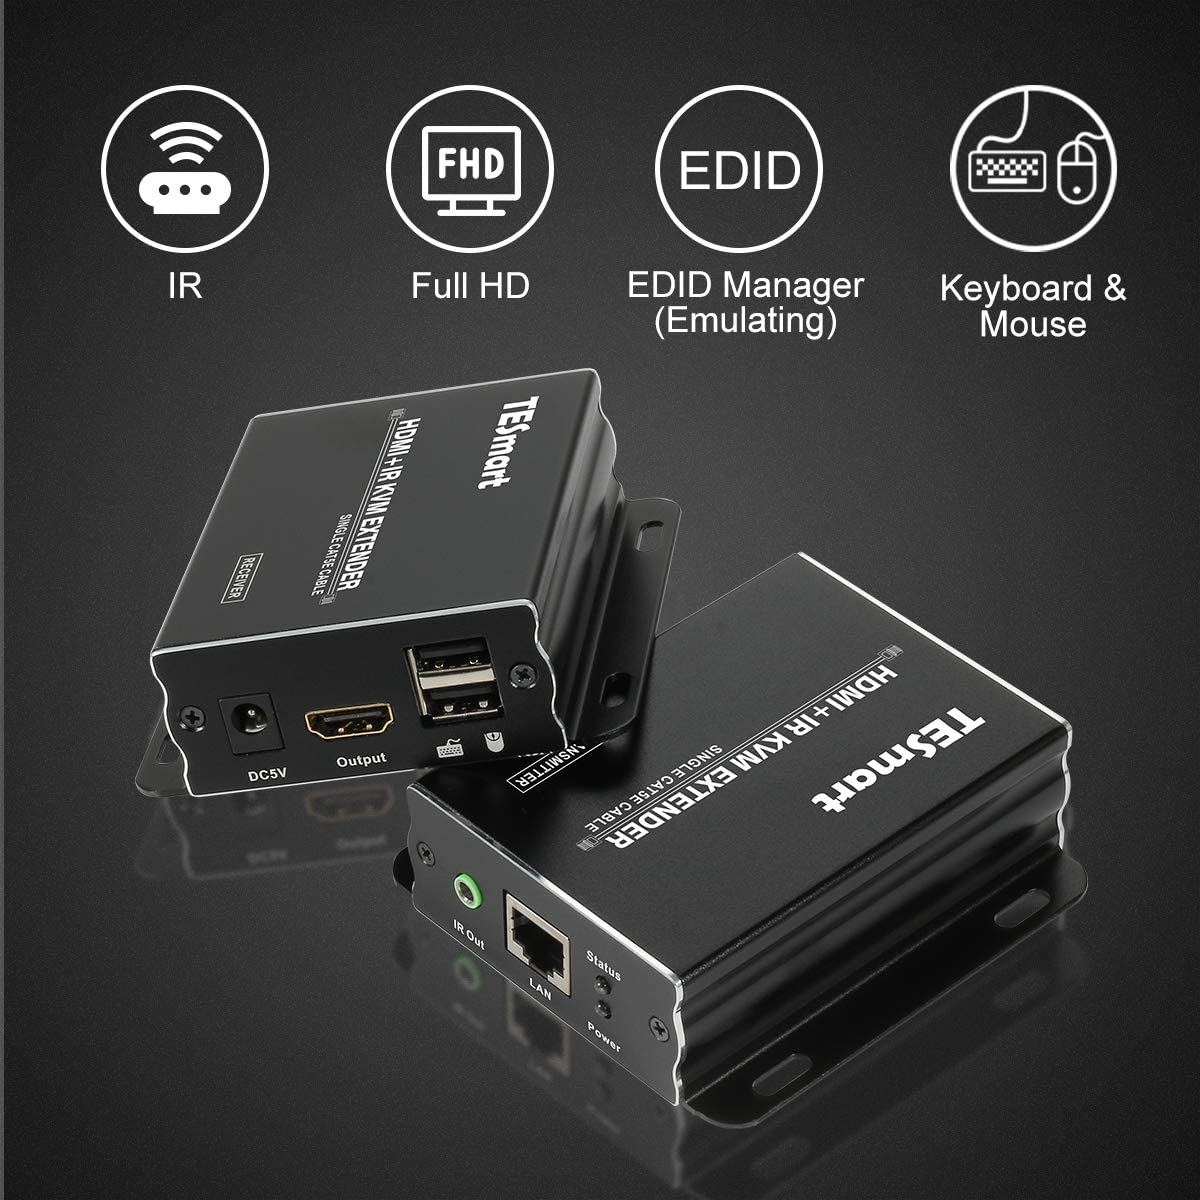 TESmart 60M HDMI KVM Extender Over Cat5e/6 with IR HDMI Extender Up to 200 Feet Support EDID 10.2 Gbps 1080P@60Hz - image 5 of 7